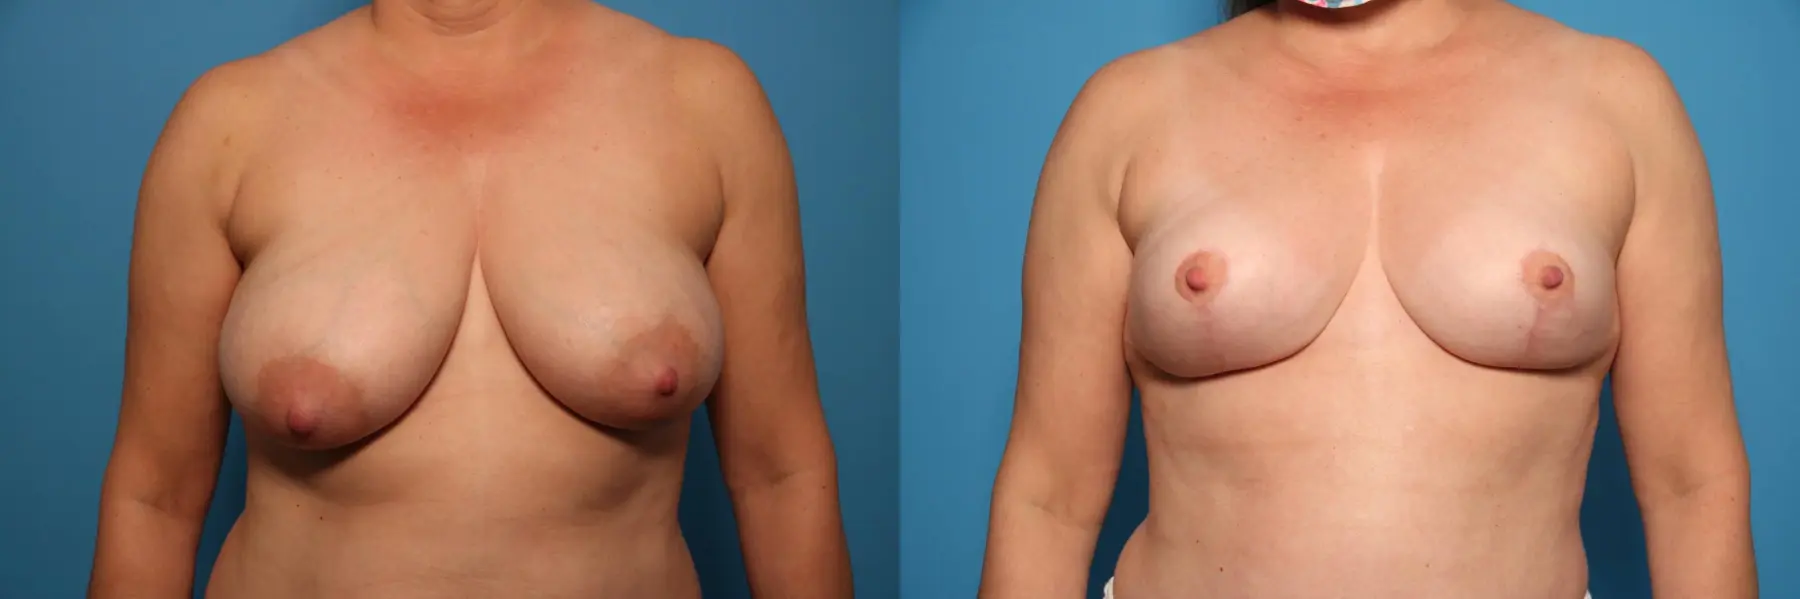 Breast Lift-Reduction: Patient 4 - Before and After  